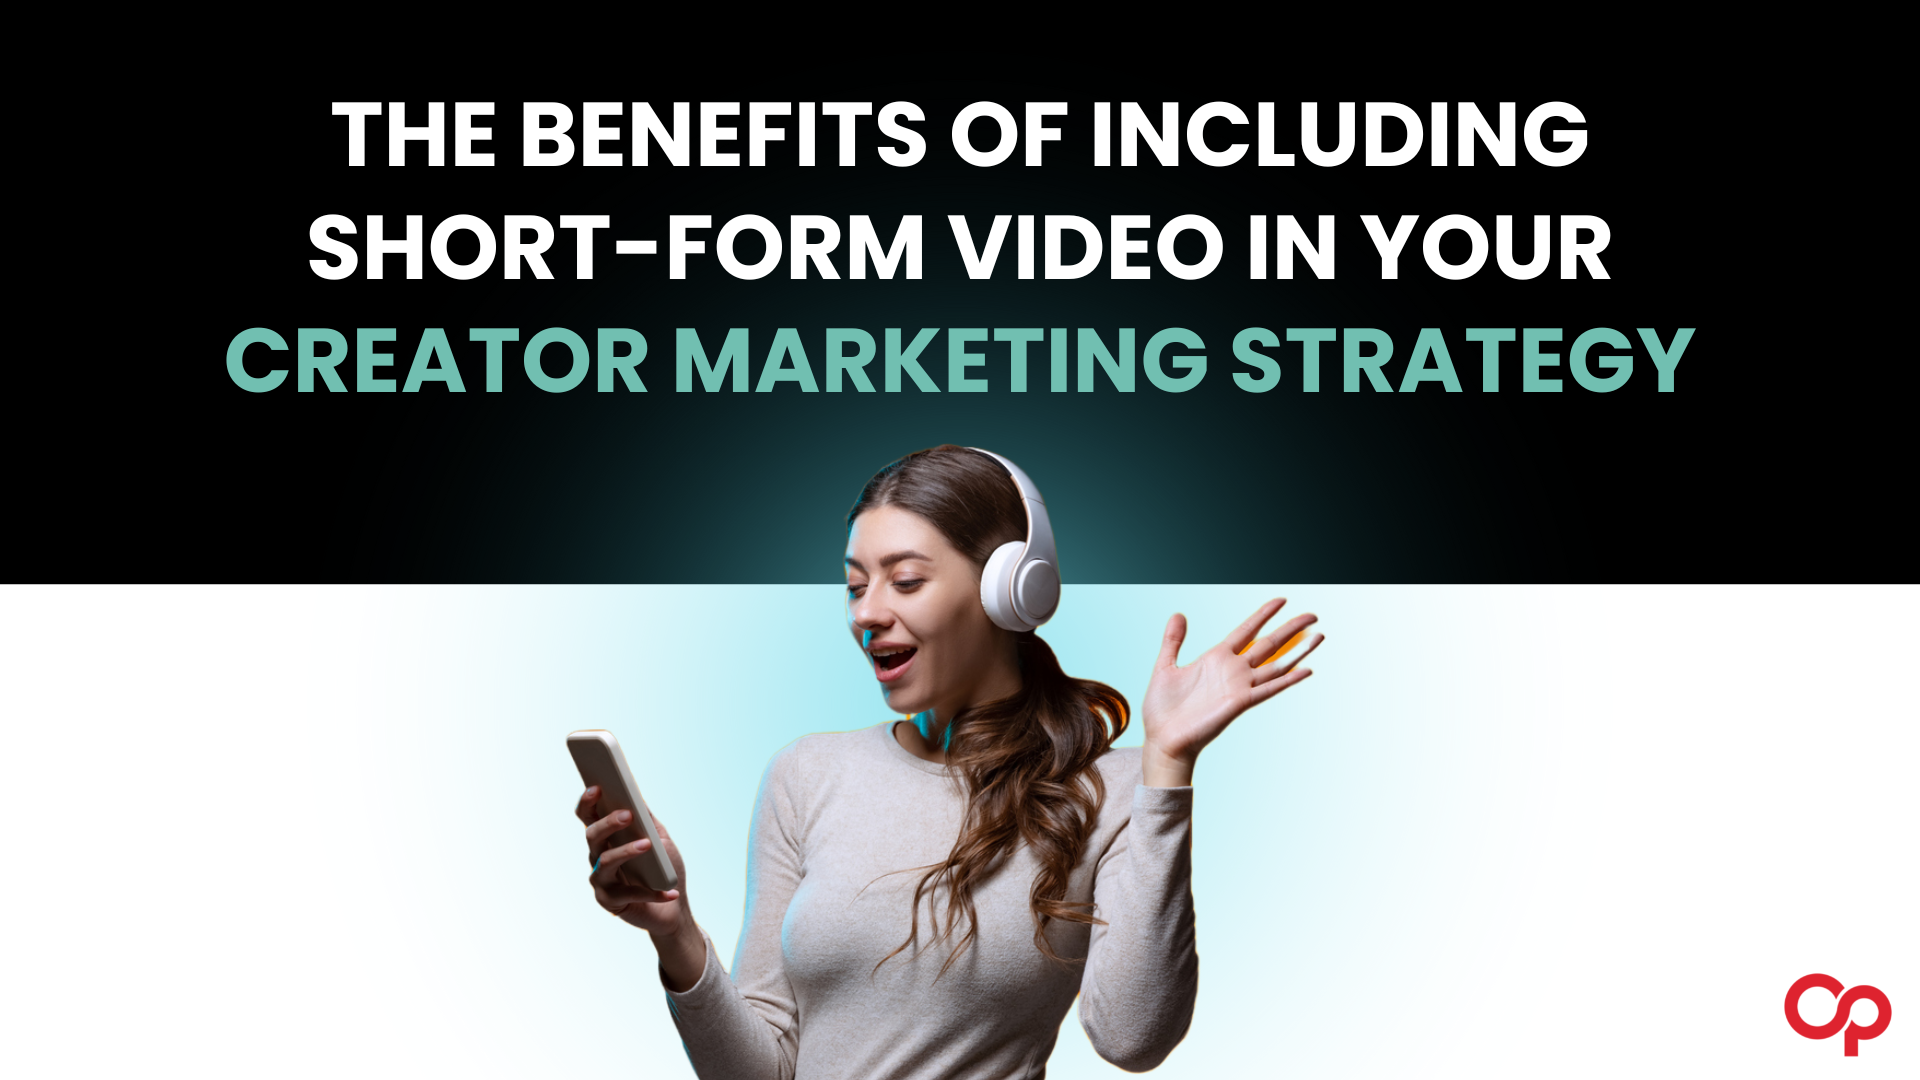 [REPORT] Your Guide To Creating Engaging Short-Form Video Campaigns